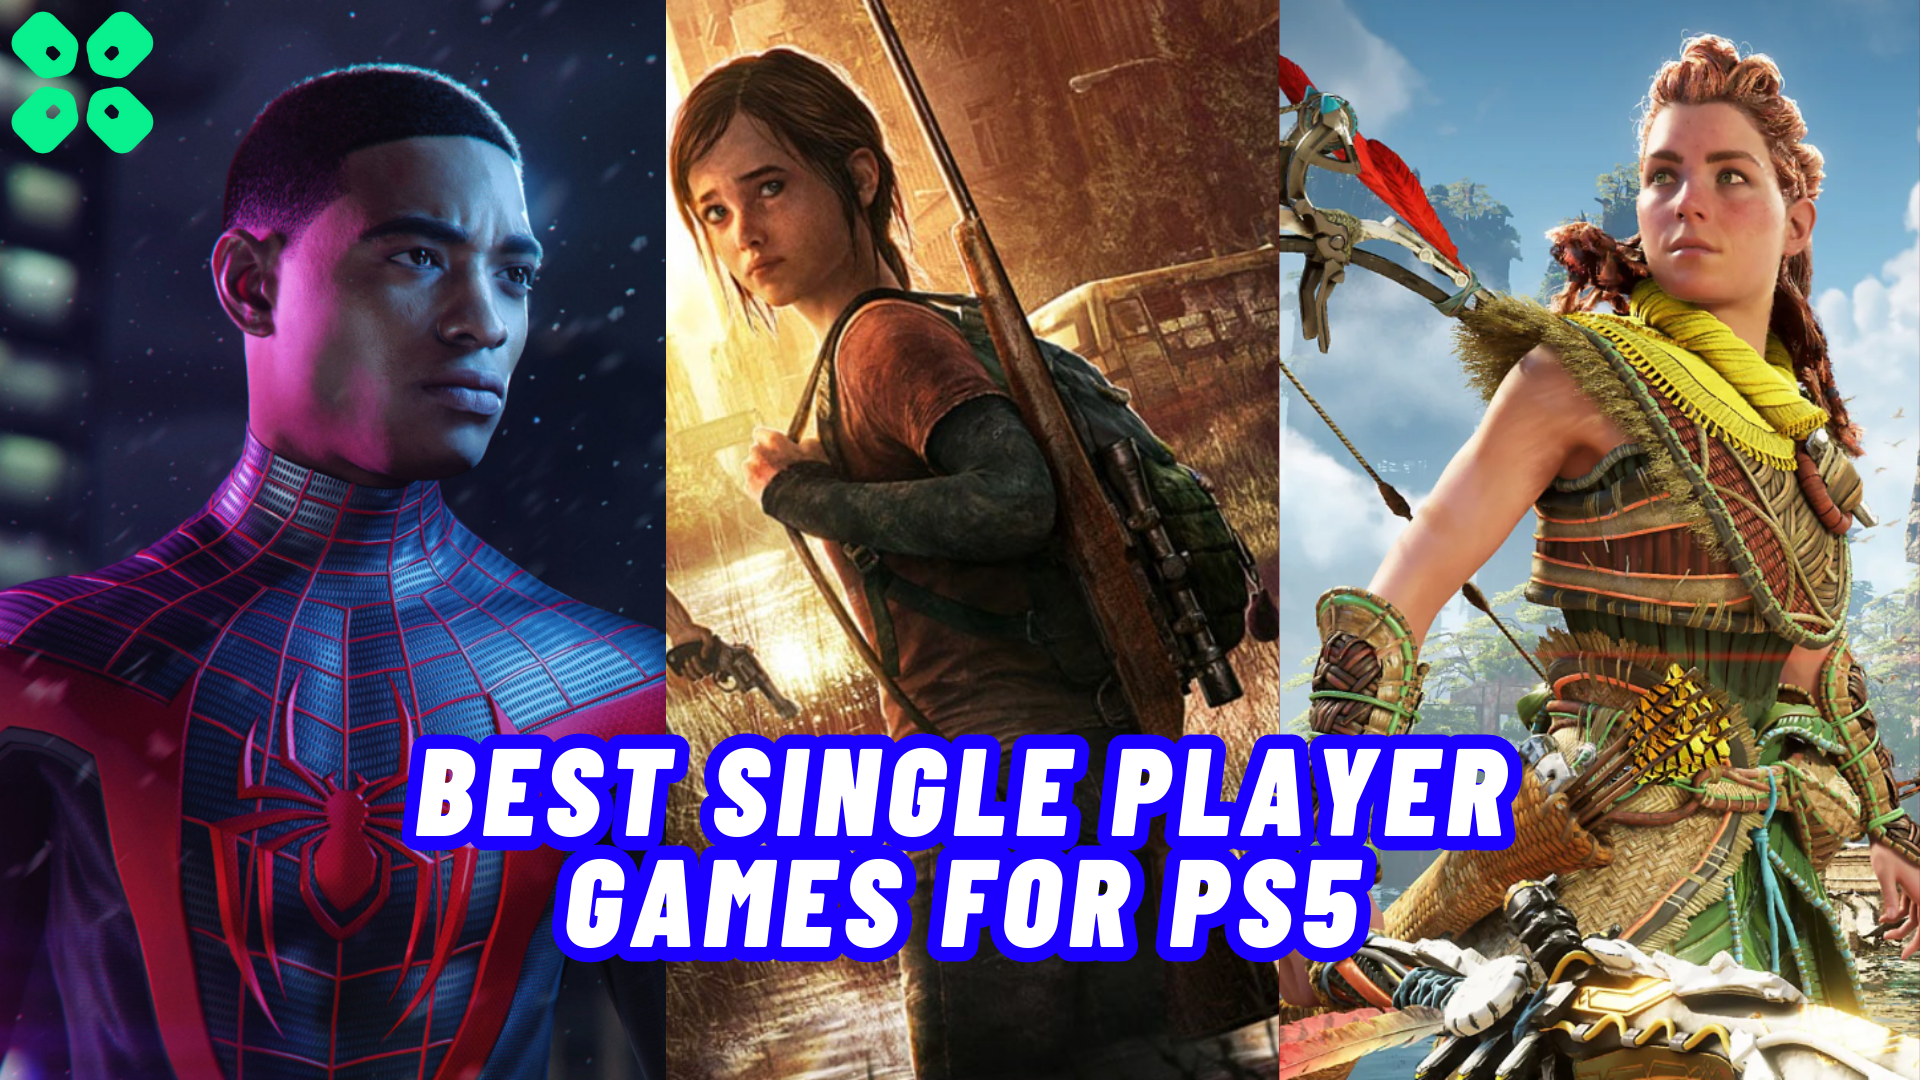 Best Single Player Games for PS5